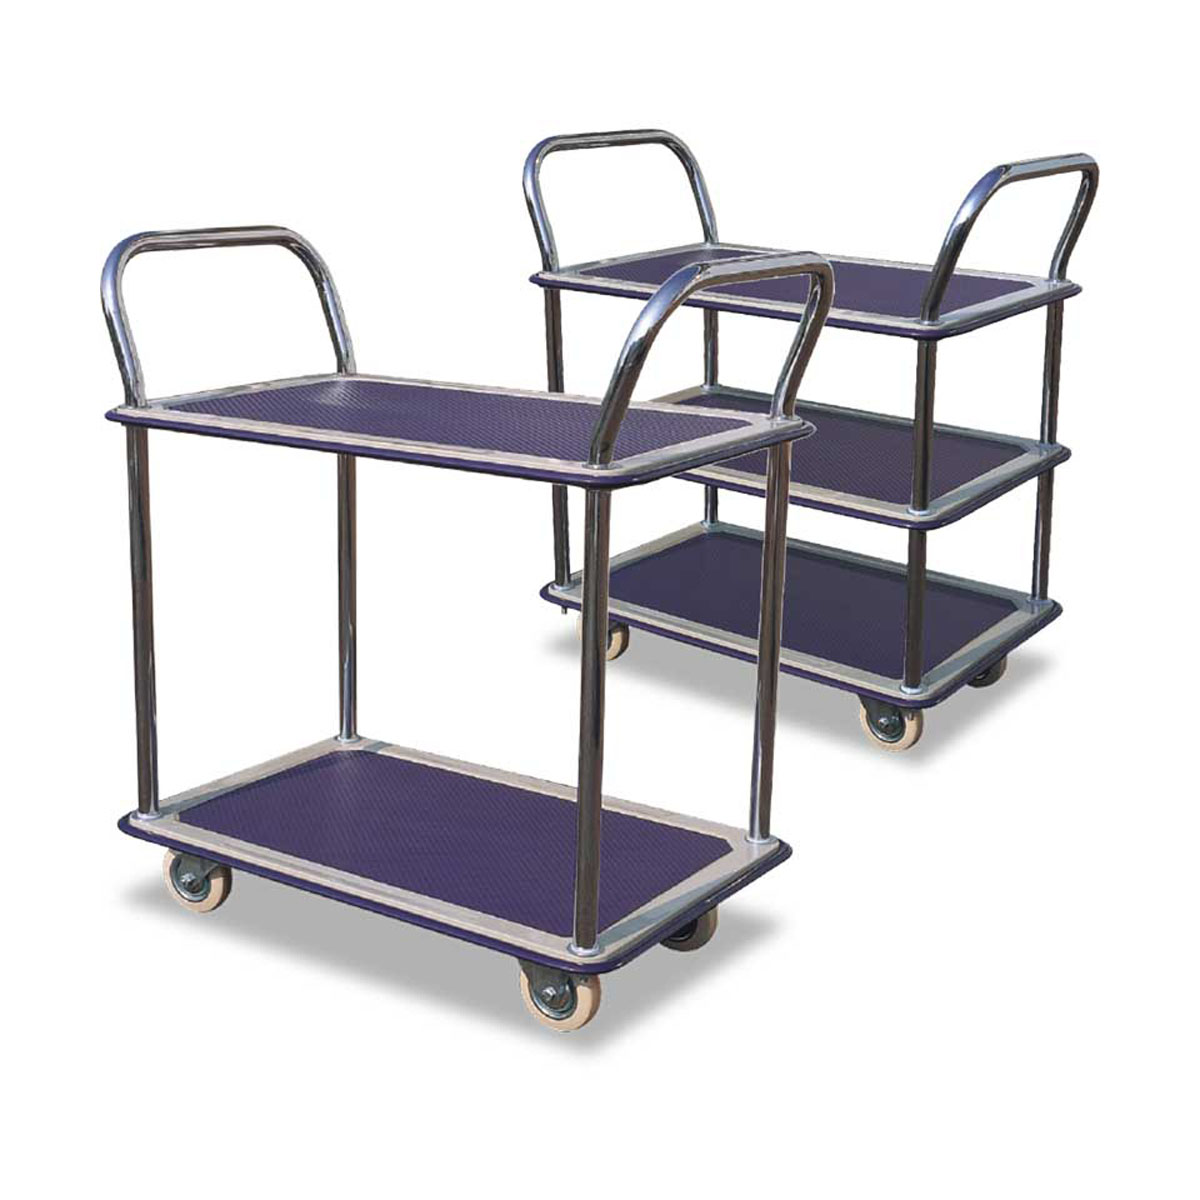 Buy Order-picking Trolley (2-3 Shelf) available at Astrolift NZ